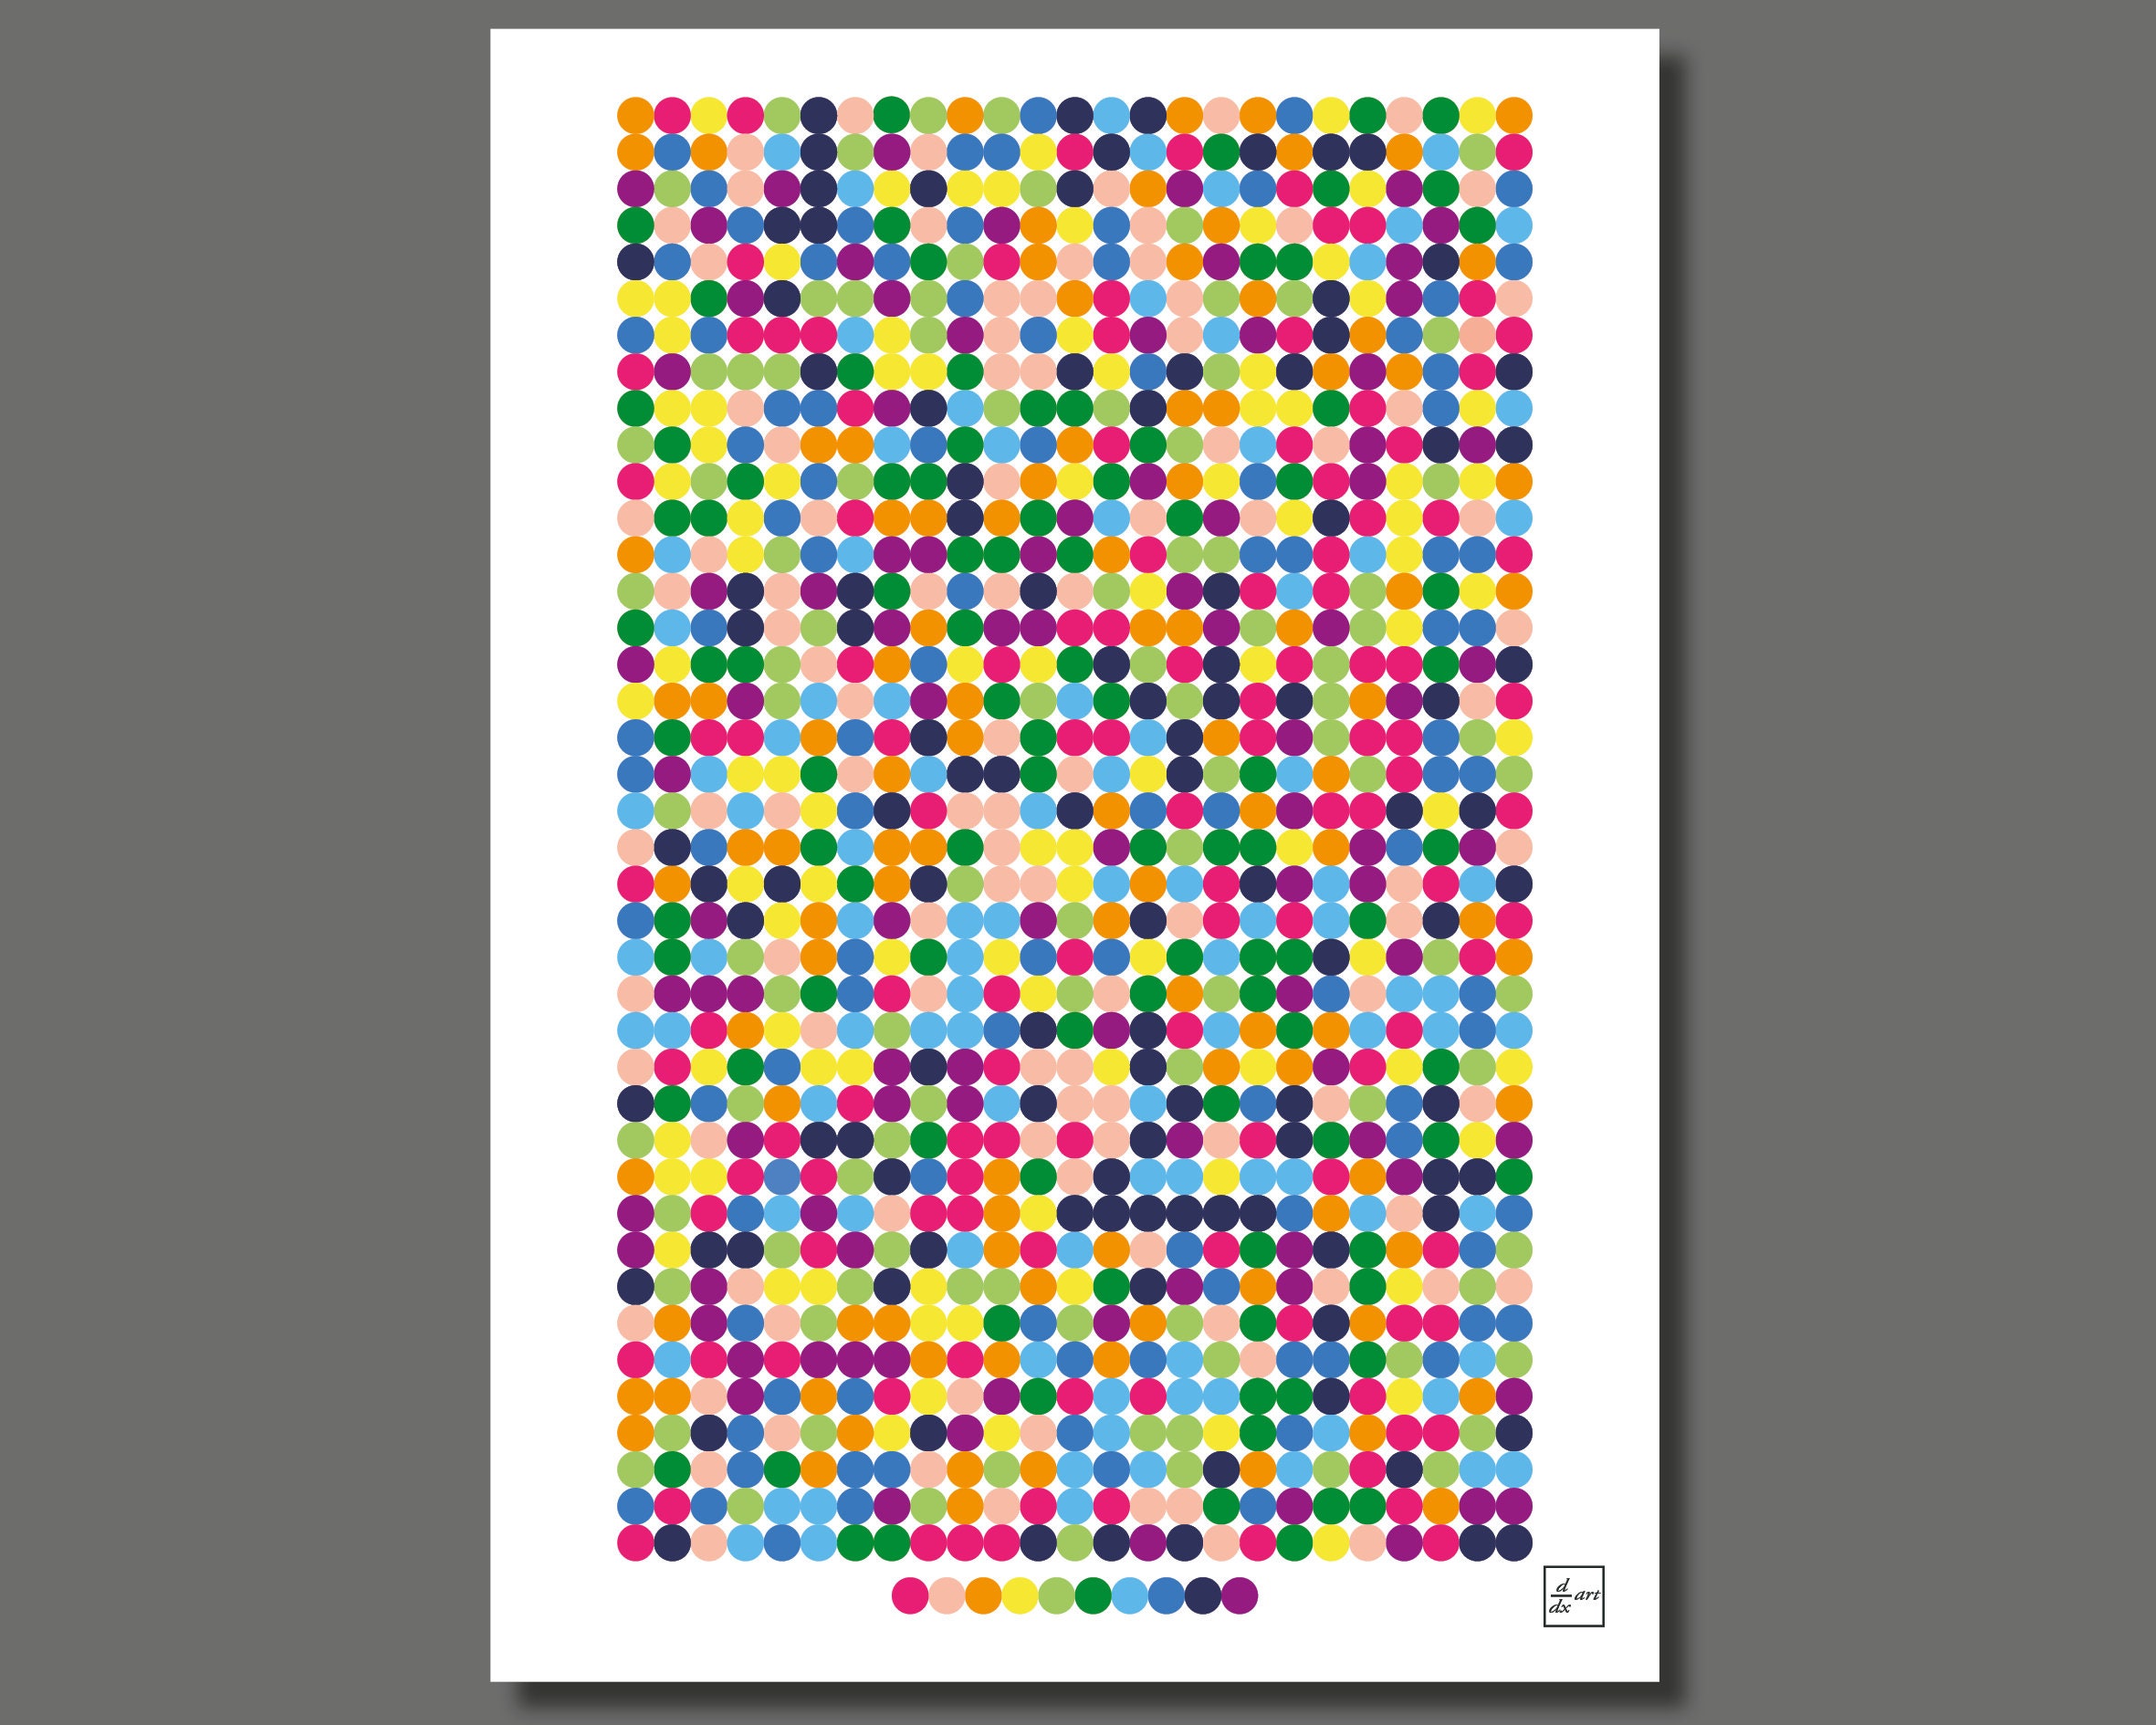 first-1000-digits-of-pi-no-1-a4-size-art-print-etsy